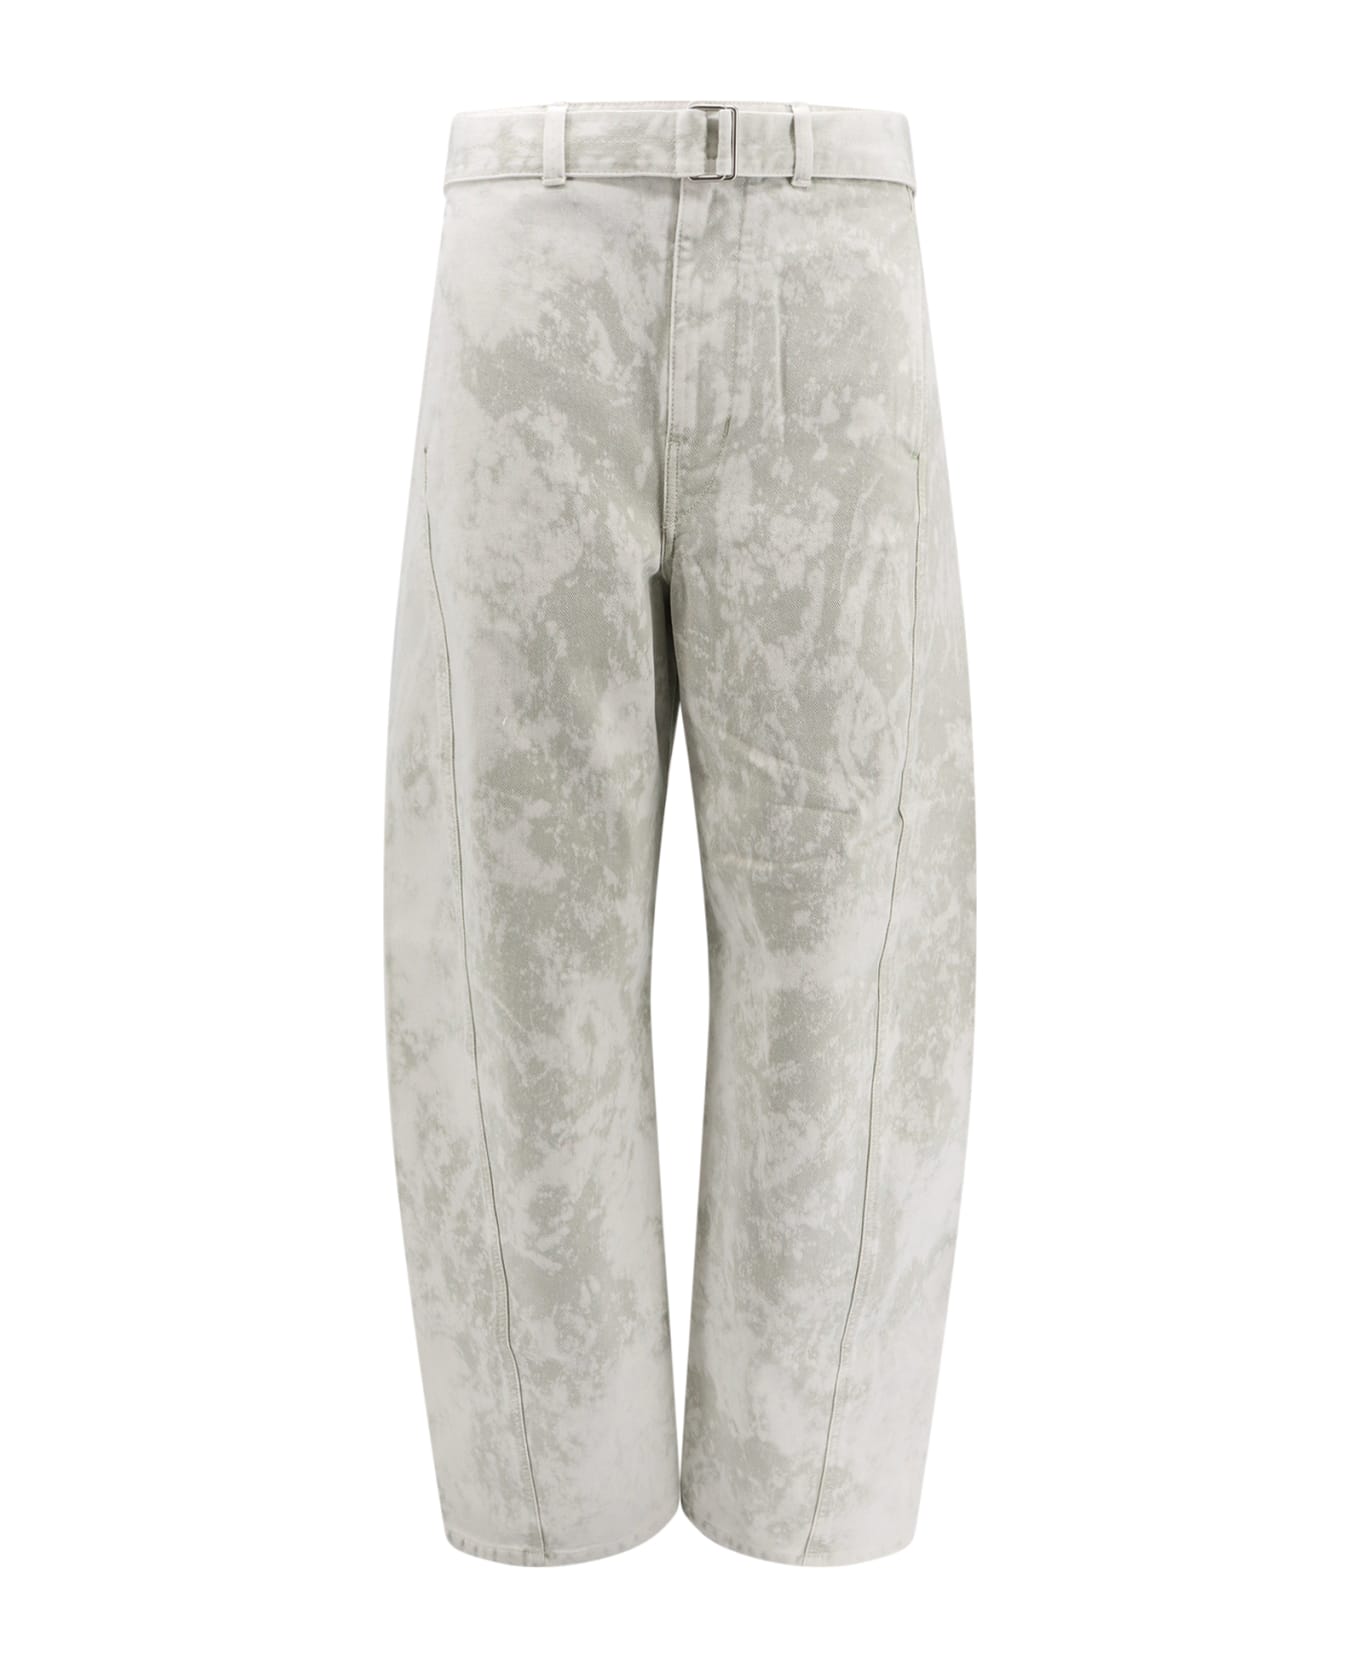 Lemaire Twisted Belted Pants Trouser - IVORY